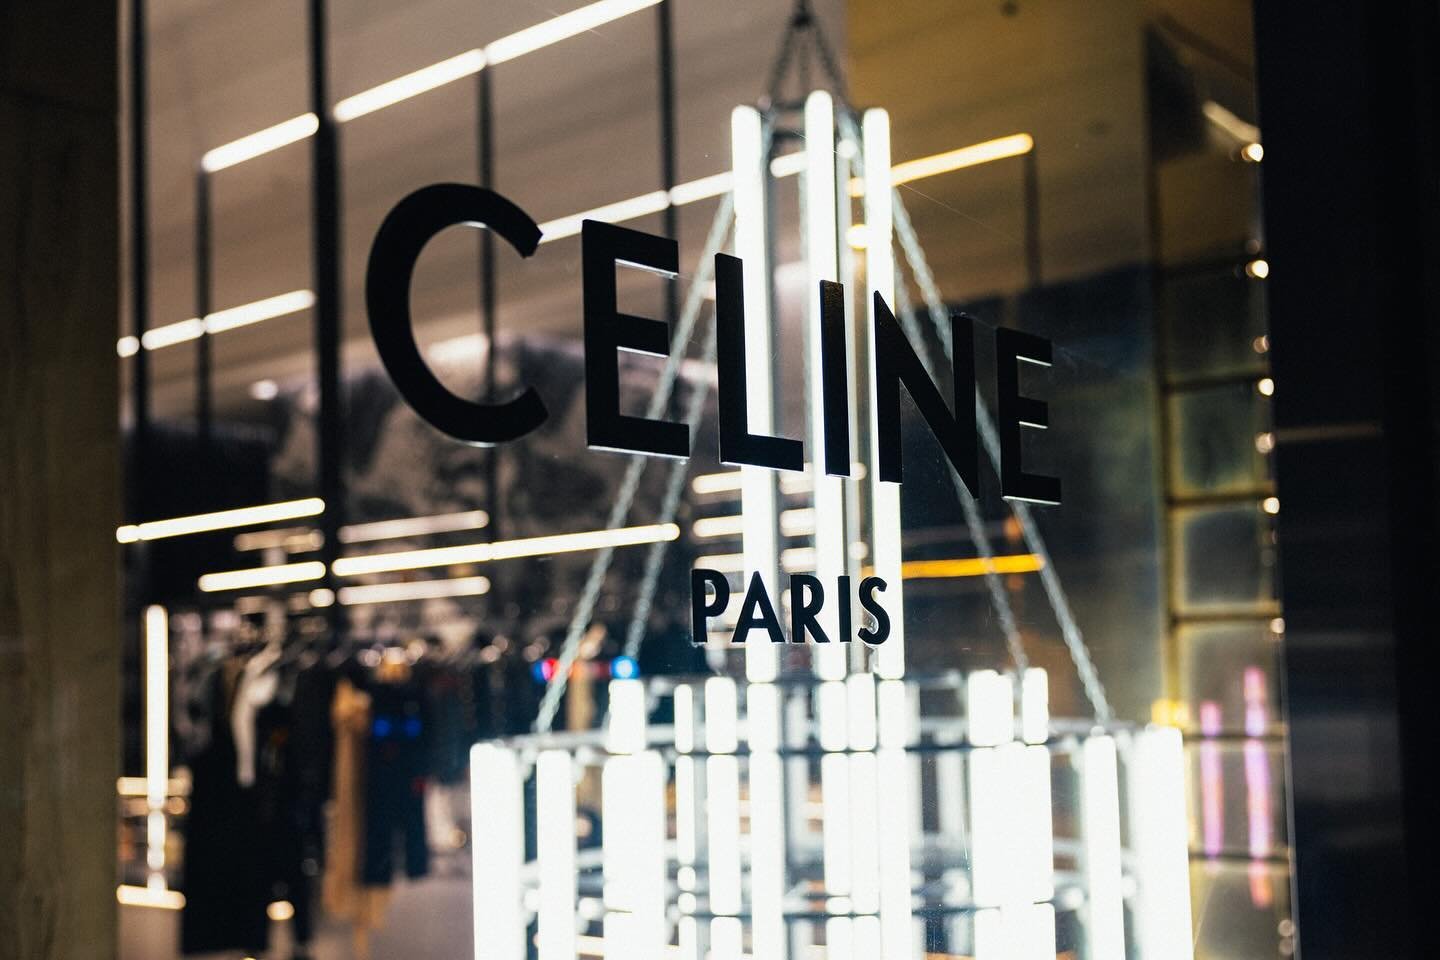 @celine asked me to capture in an abstract way the Bank Violette&rsquo;s chandelier installations in their two New York Store.
Produced by @paradoxal_residency 

#celine #chandelier #banksviolette #photo #abstract #light